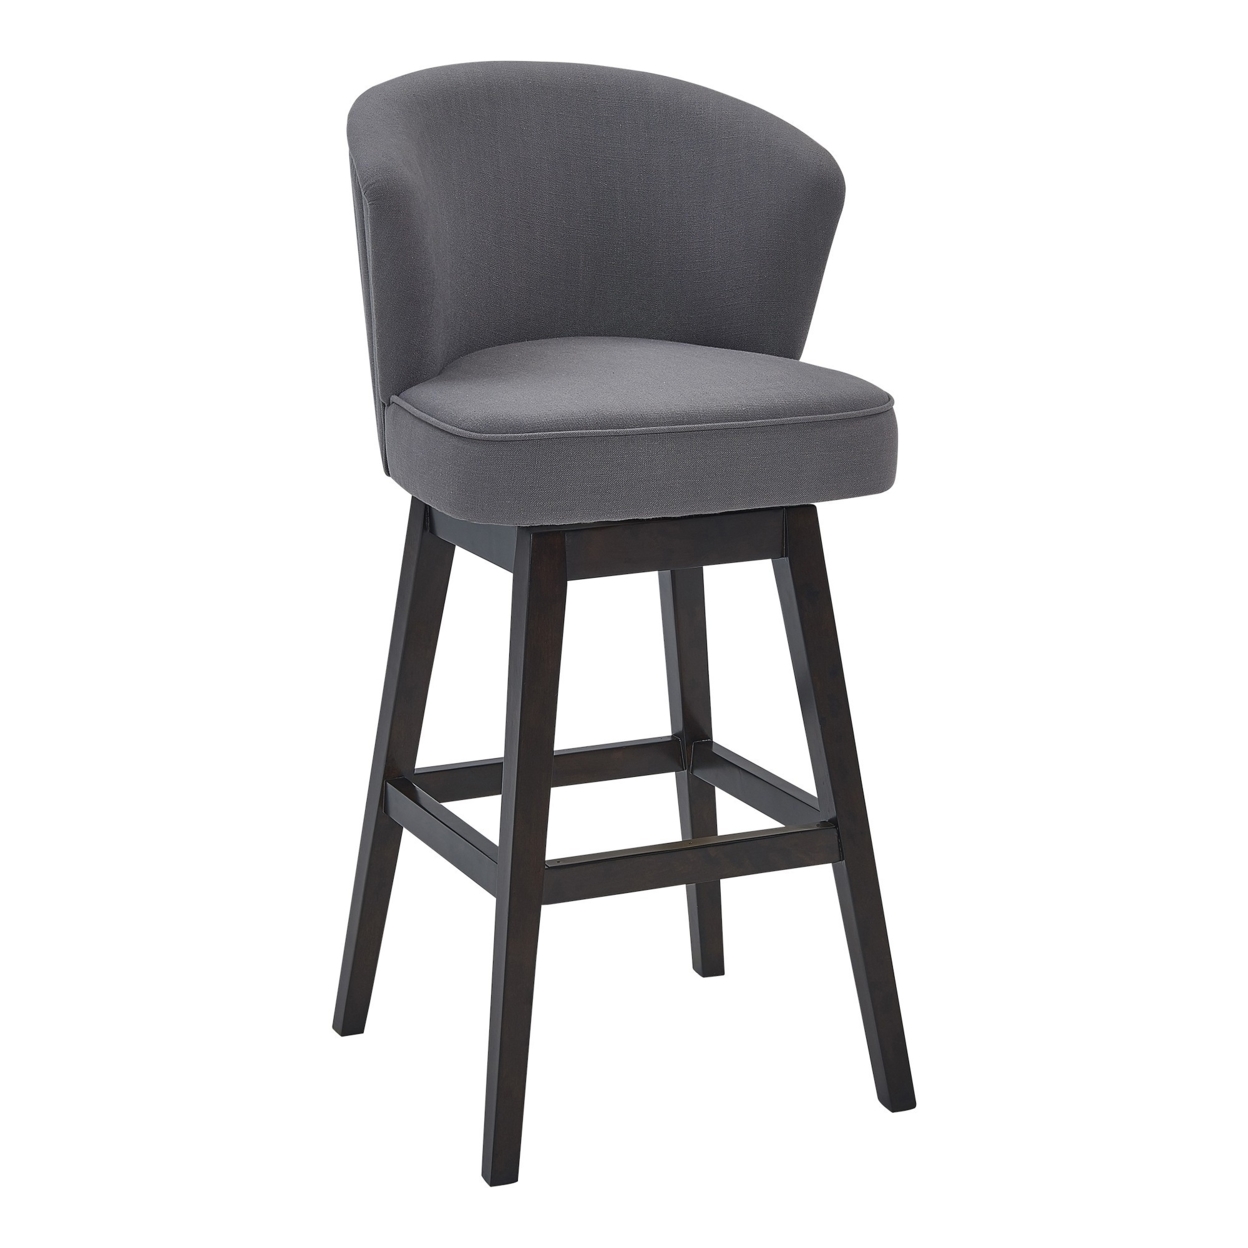 30 Inches Padded Swivel Barstool With Curved Backrest, Gray- Saltoro Sherpi